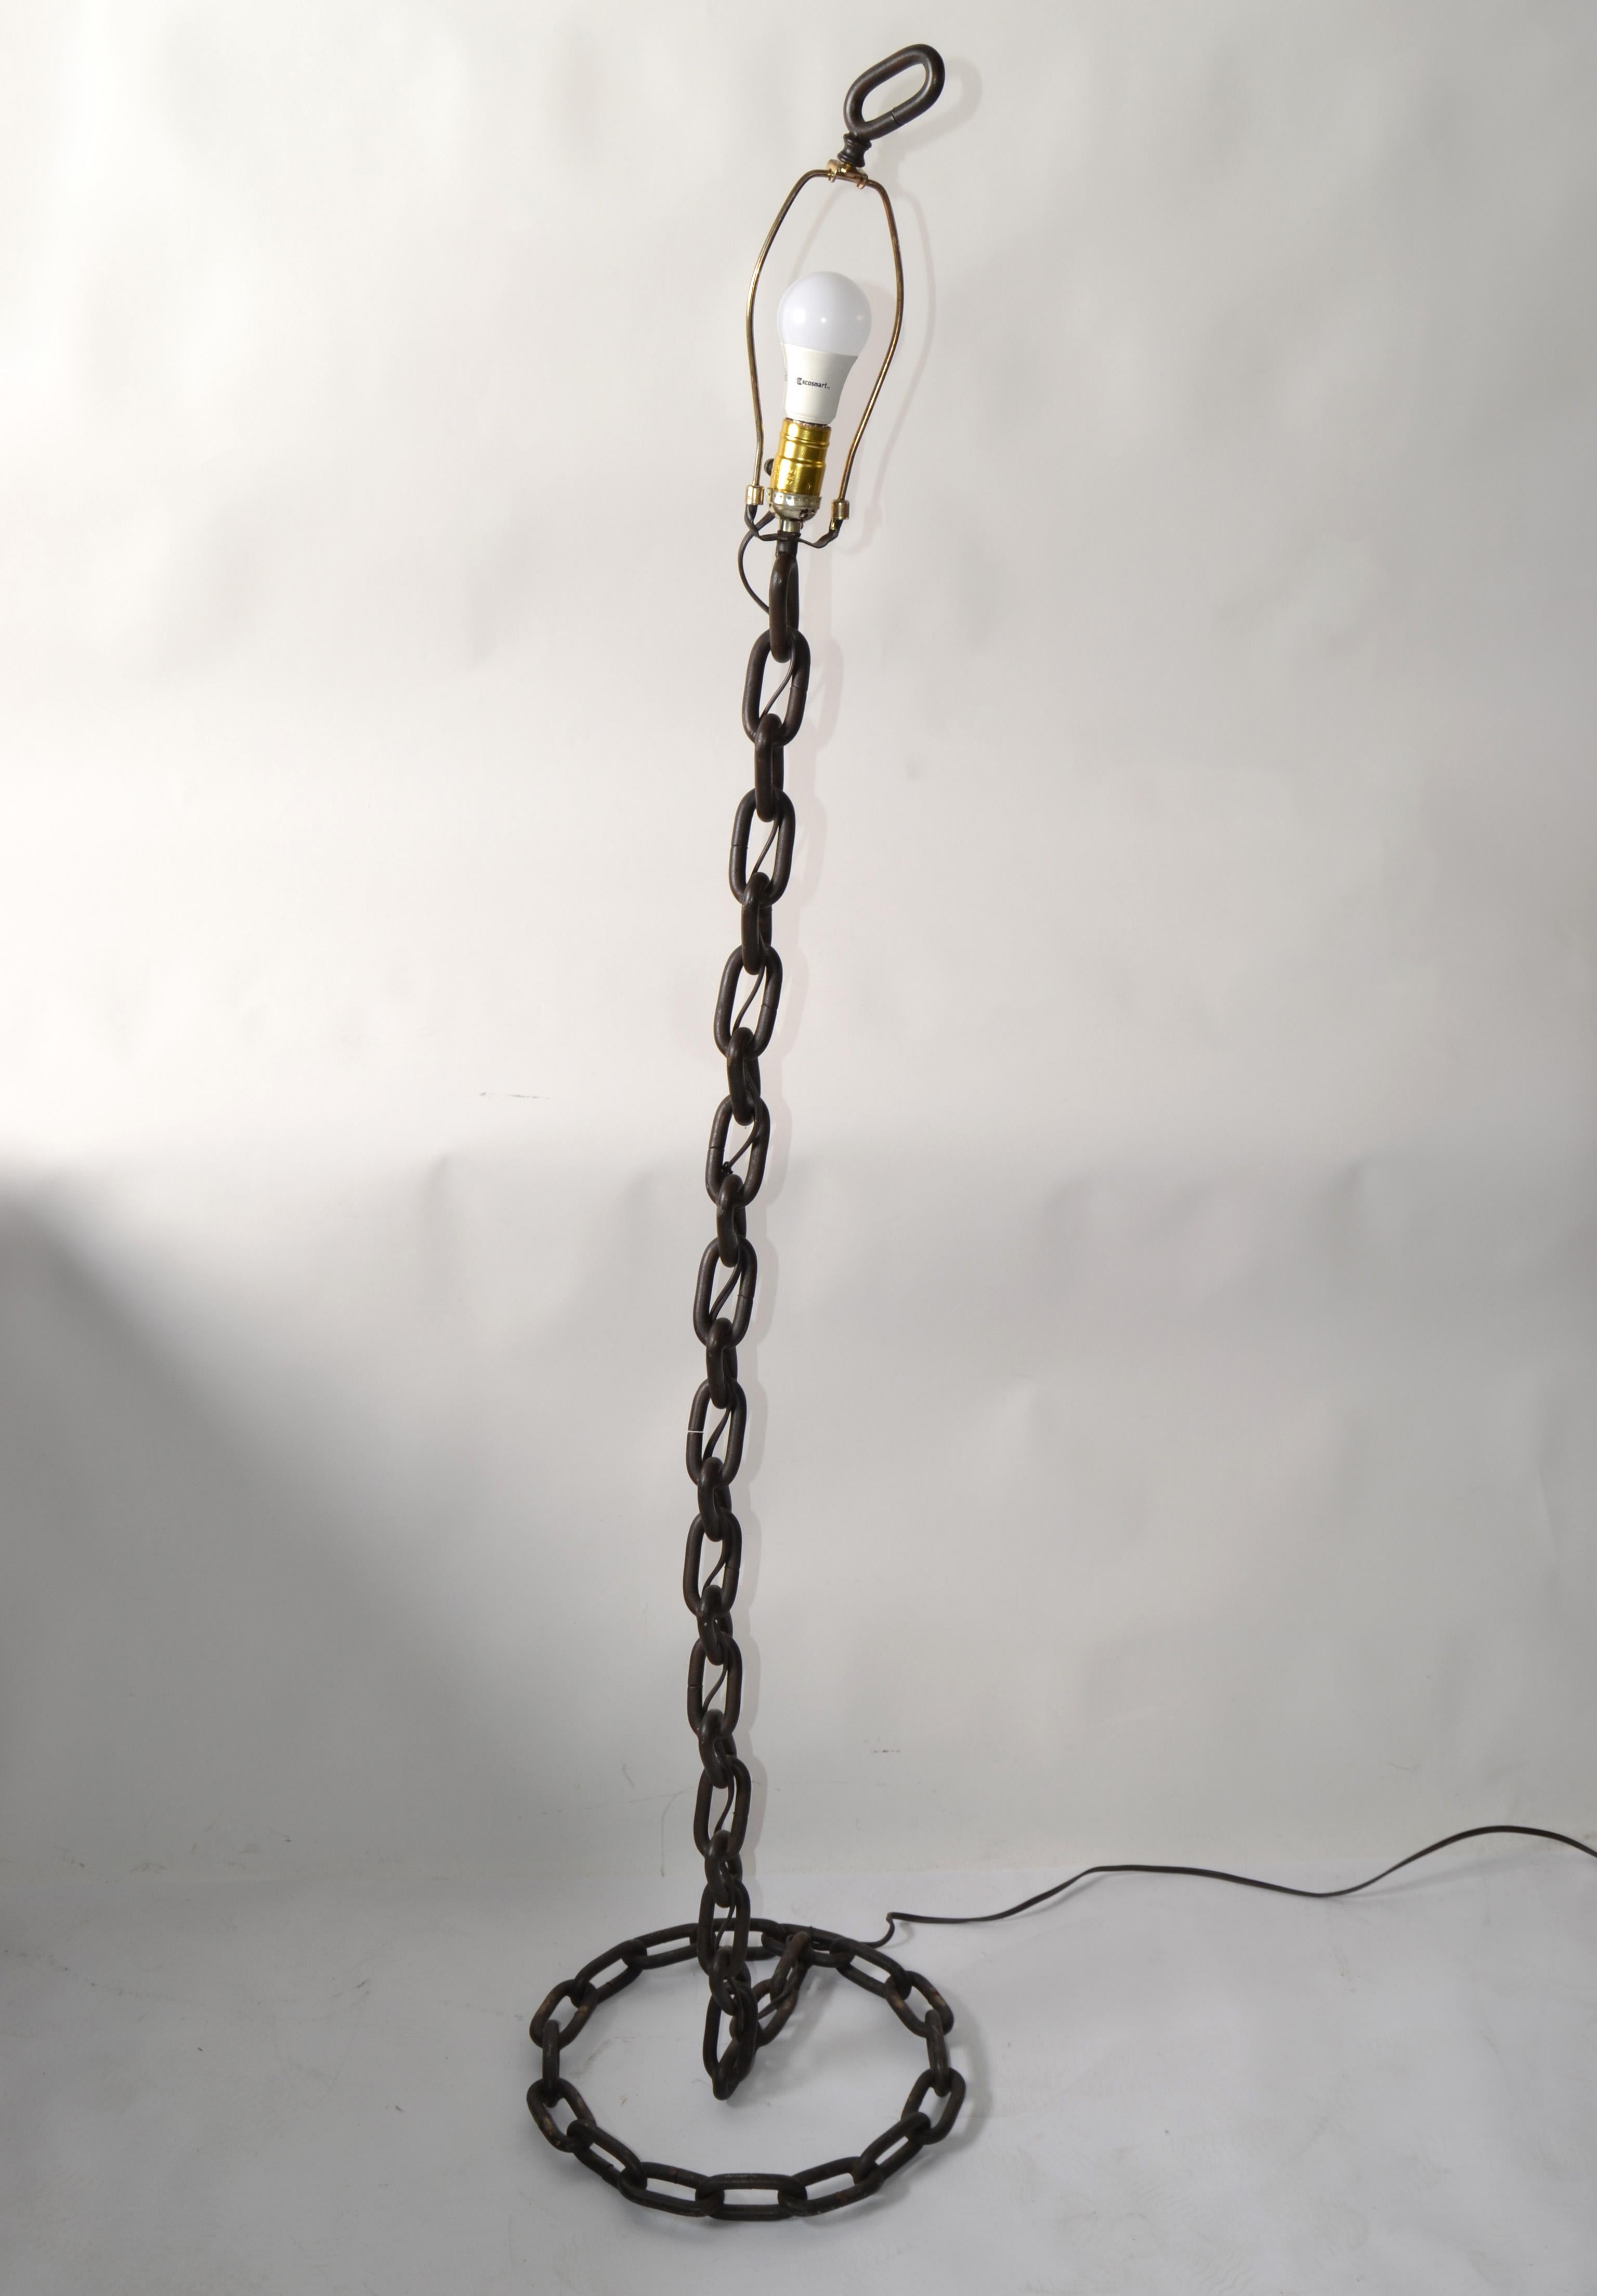 1970s French Brutalist Rustic Vintage Iron Chain Link Floor Lamp Round Base West 3